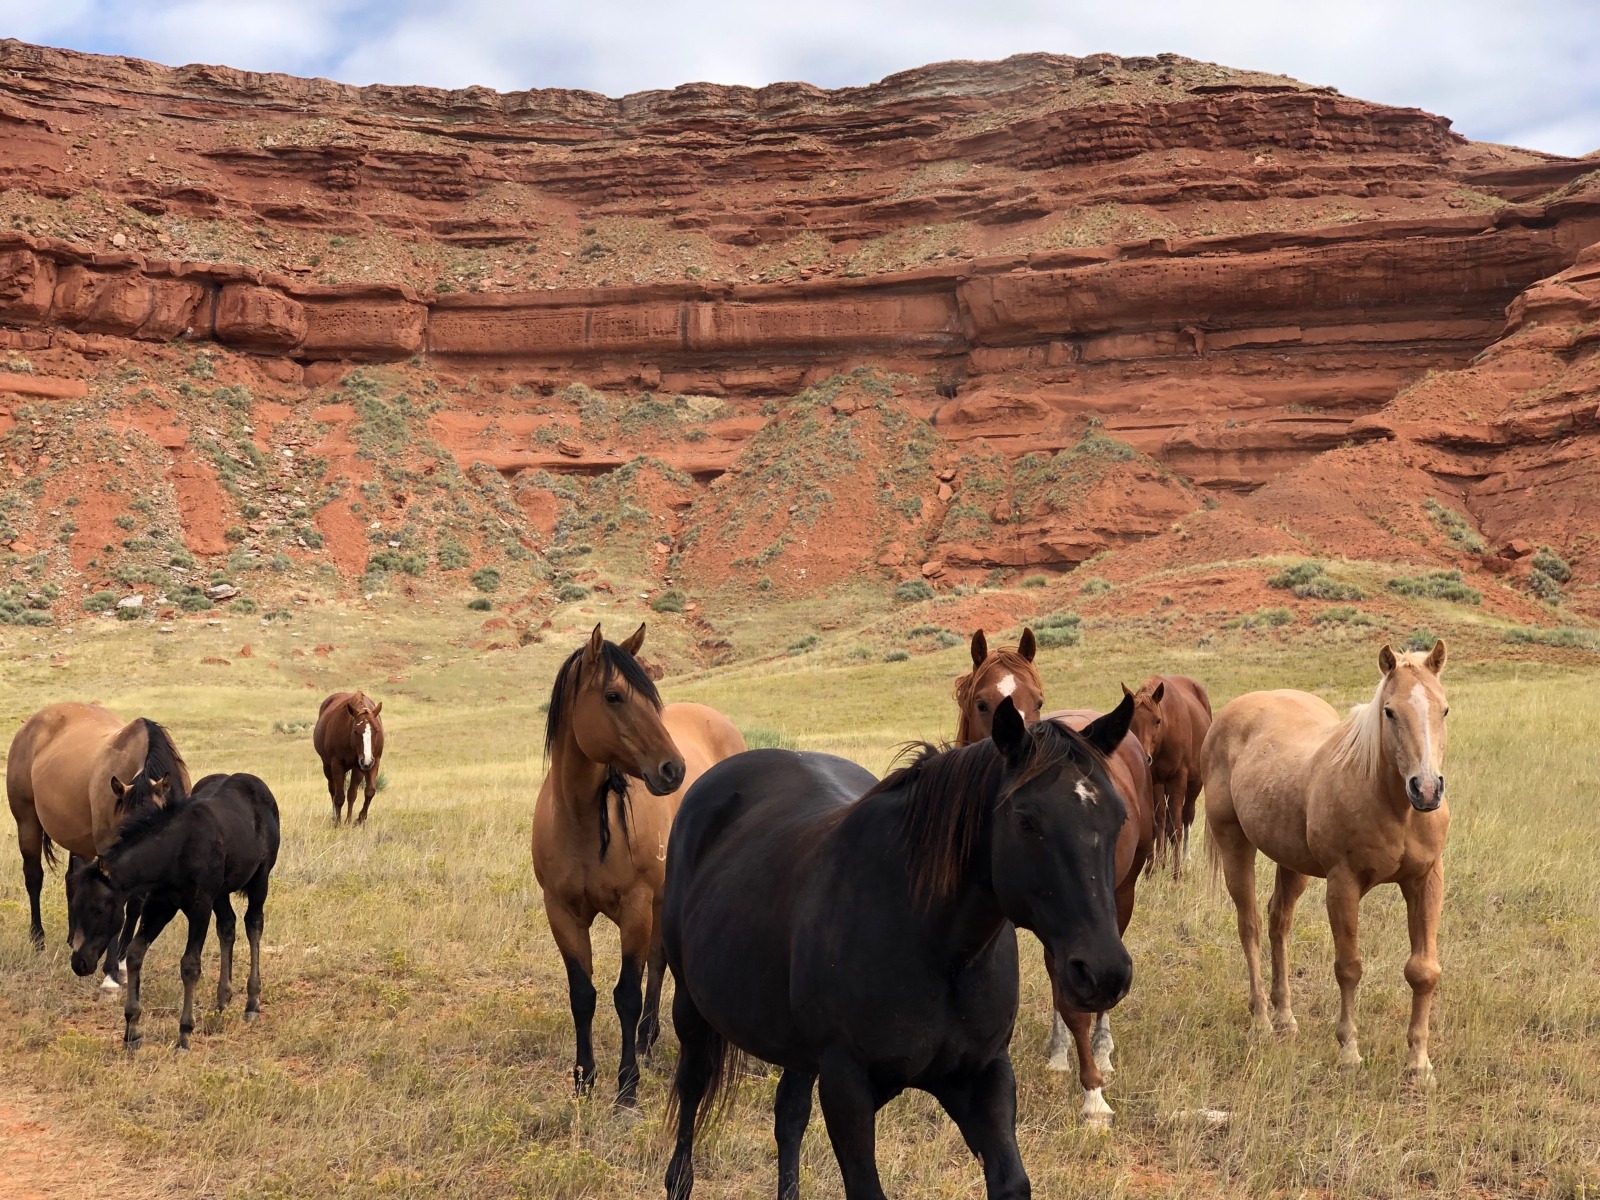 A group of eight open range horses look towards the camera from a dry grassy field with red cliffs in the background.